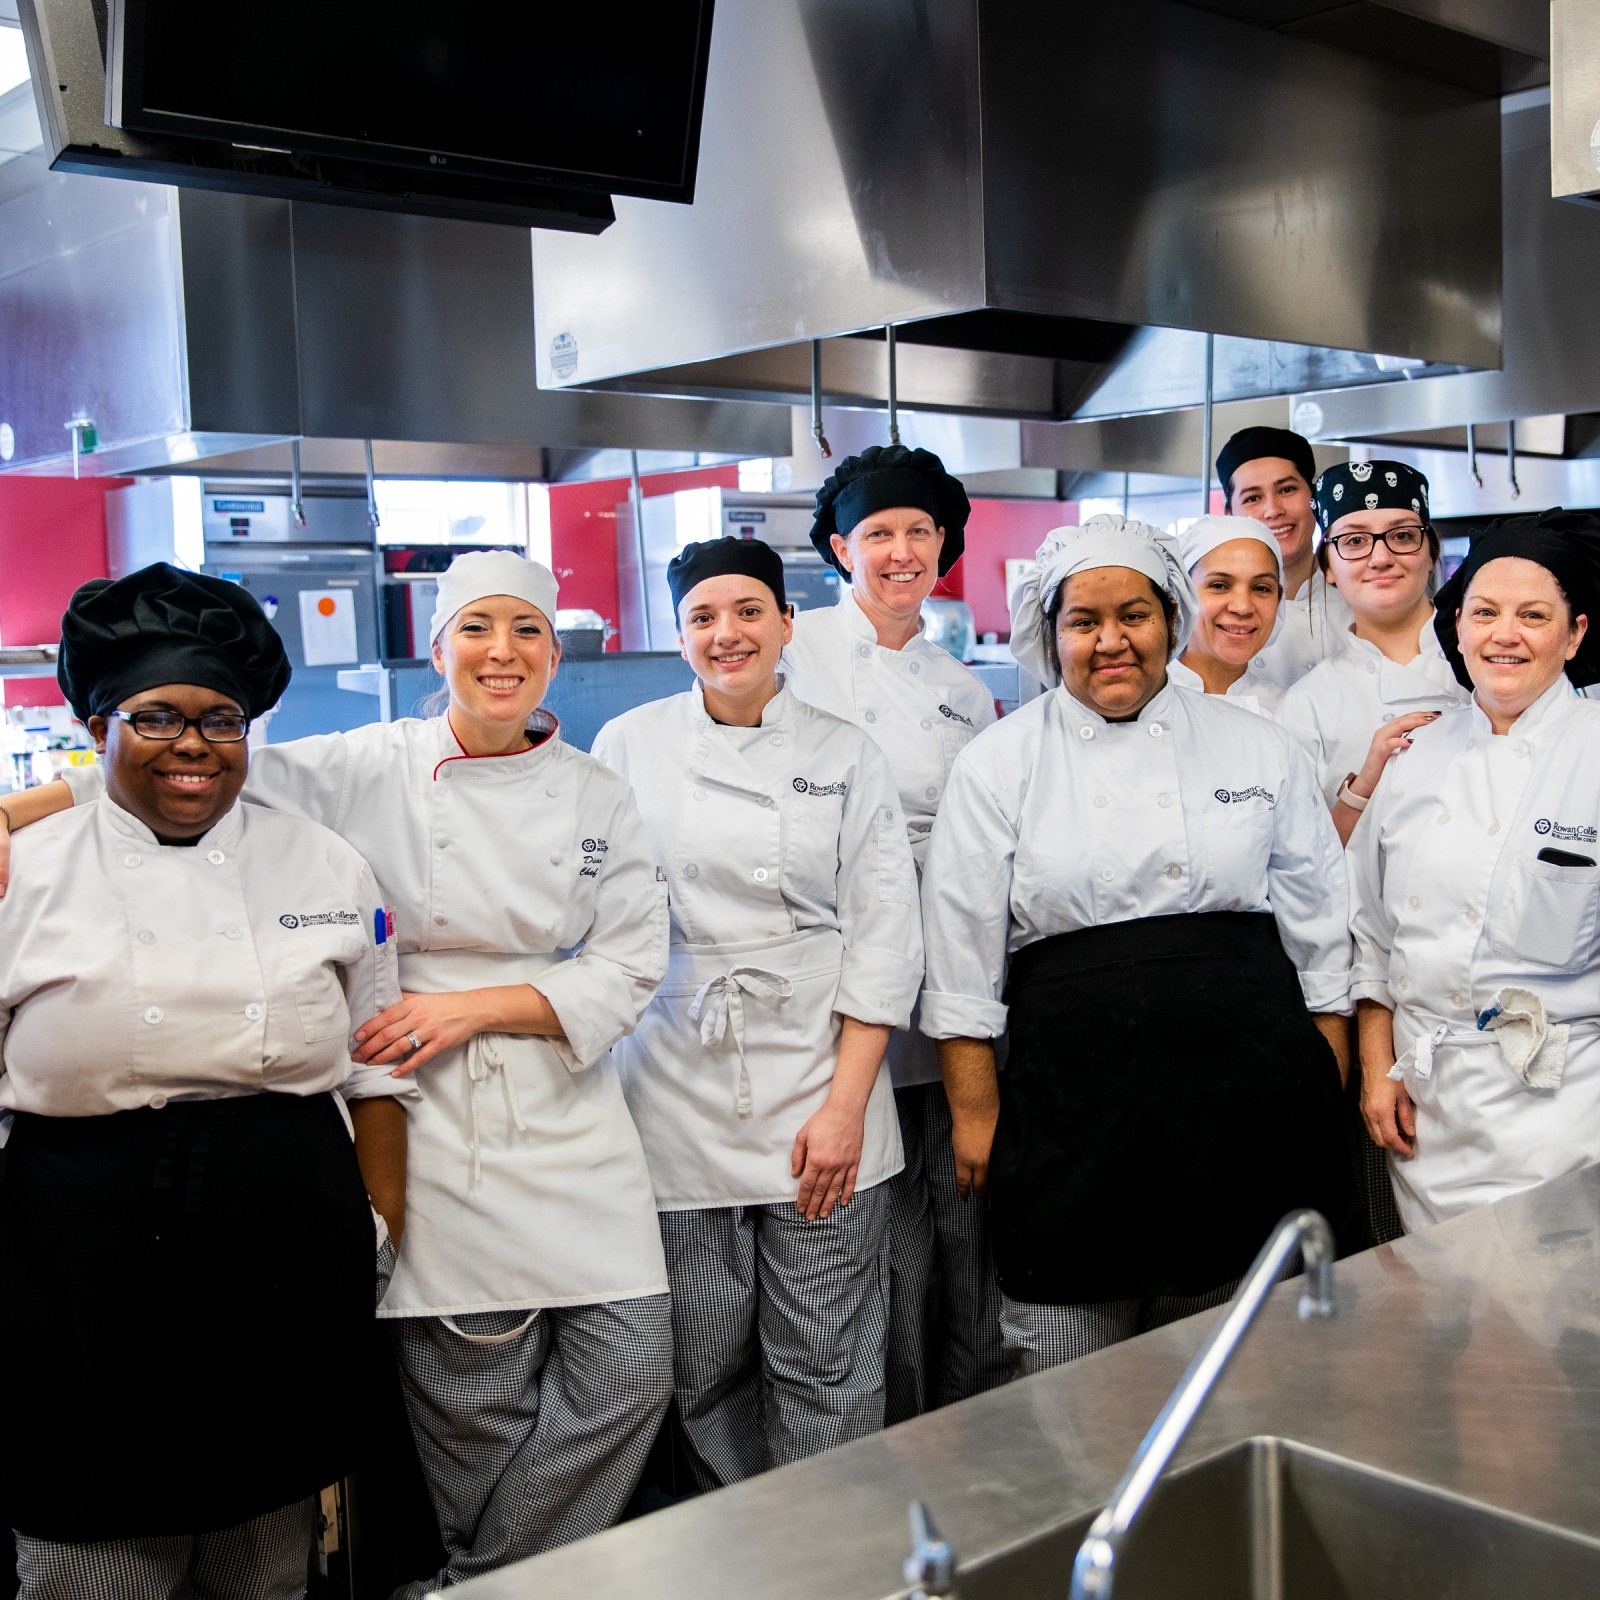 Culinary students standing side-by-side in RCBC culinary kitchen